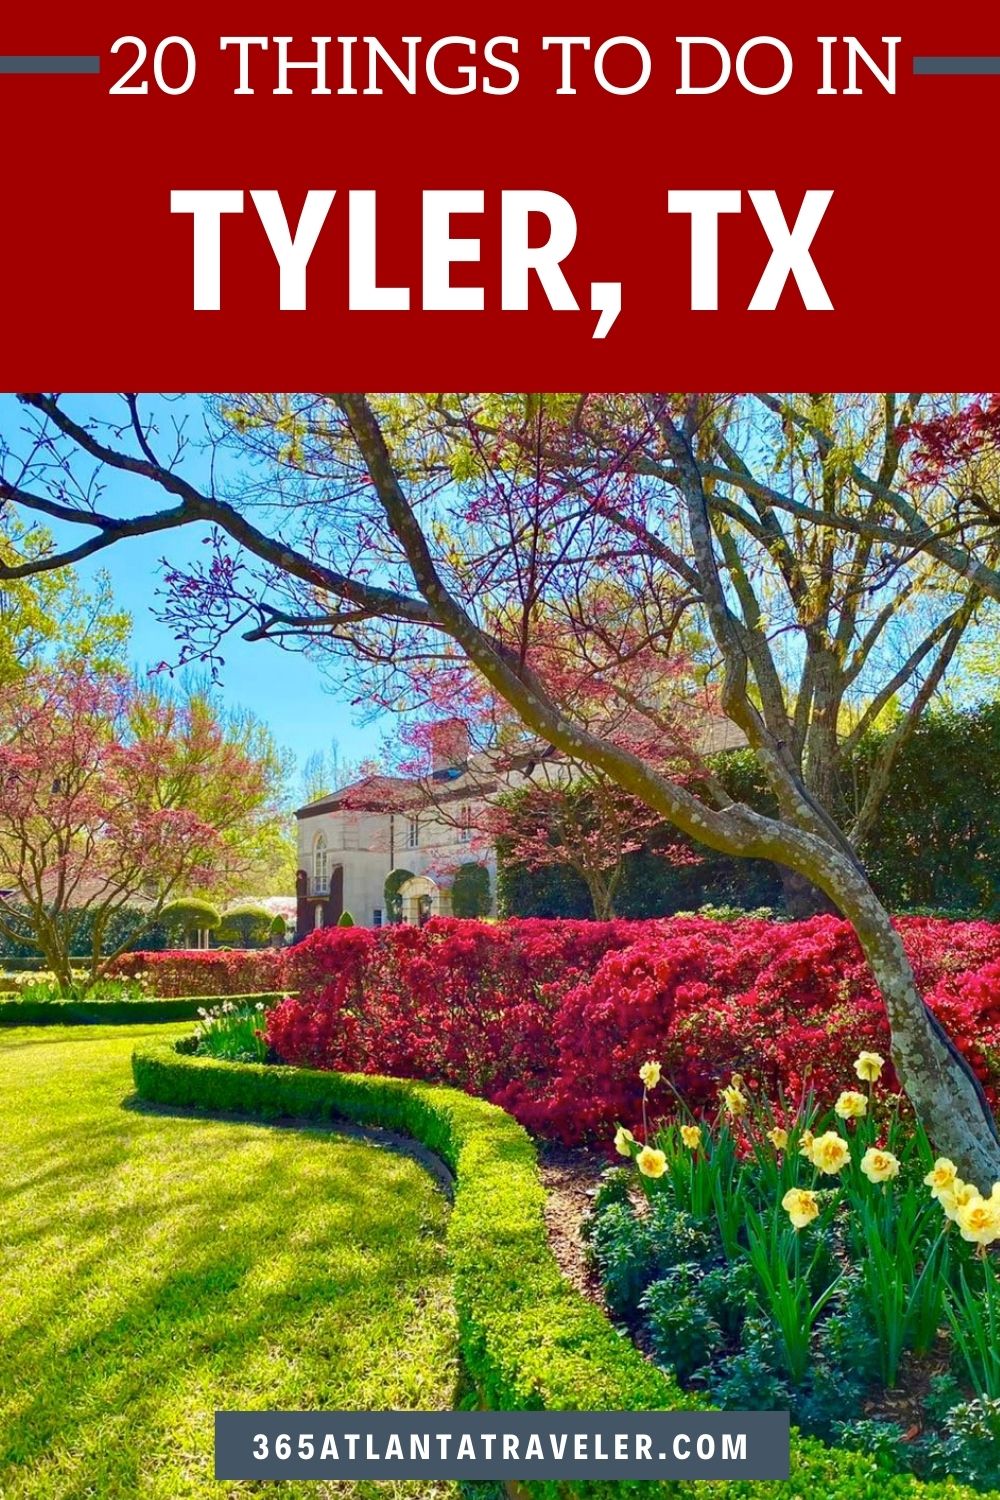 20 THINGS TO DO IN TYLER TX EVERYONE WILL LOVE